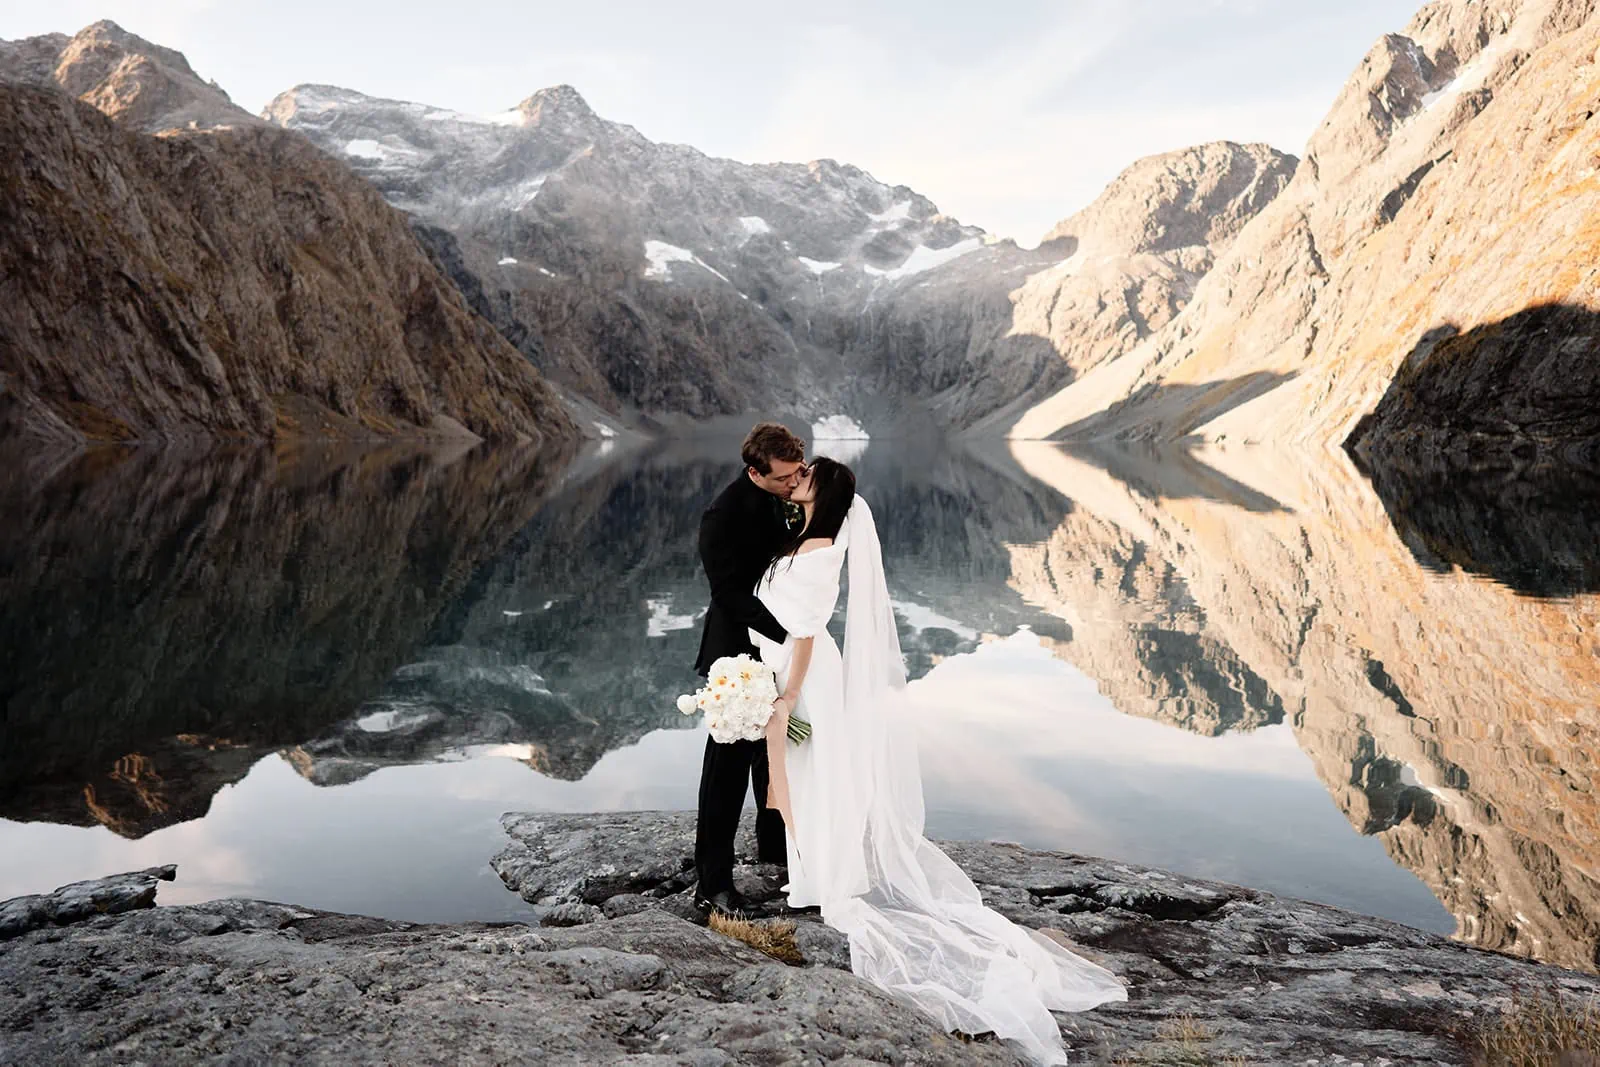 Queenstown New Zealand Elopement Wedding Photographer - A bride and groom embracing their love on their Queenstown Heli-Wedding & Elopement Package, standing in front of a picturesque lake in New Zealand.